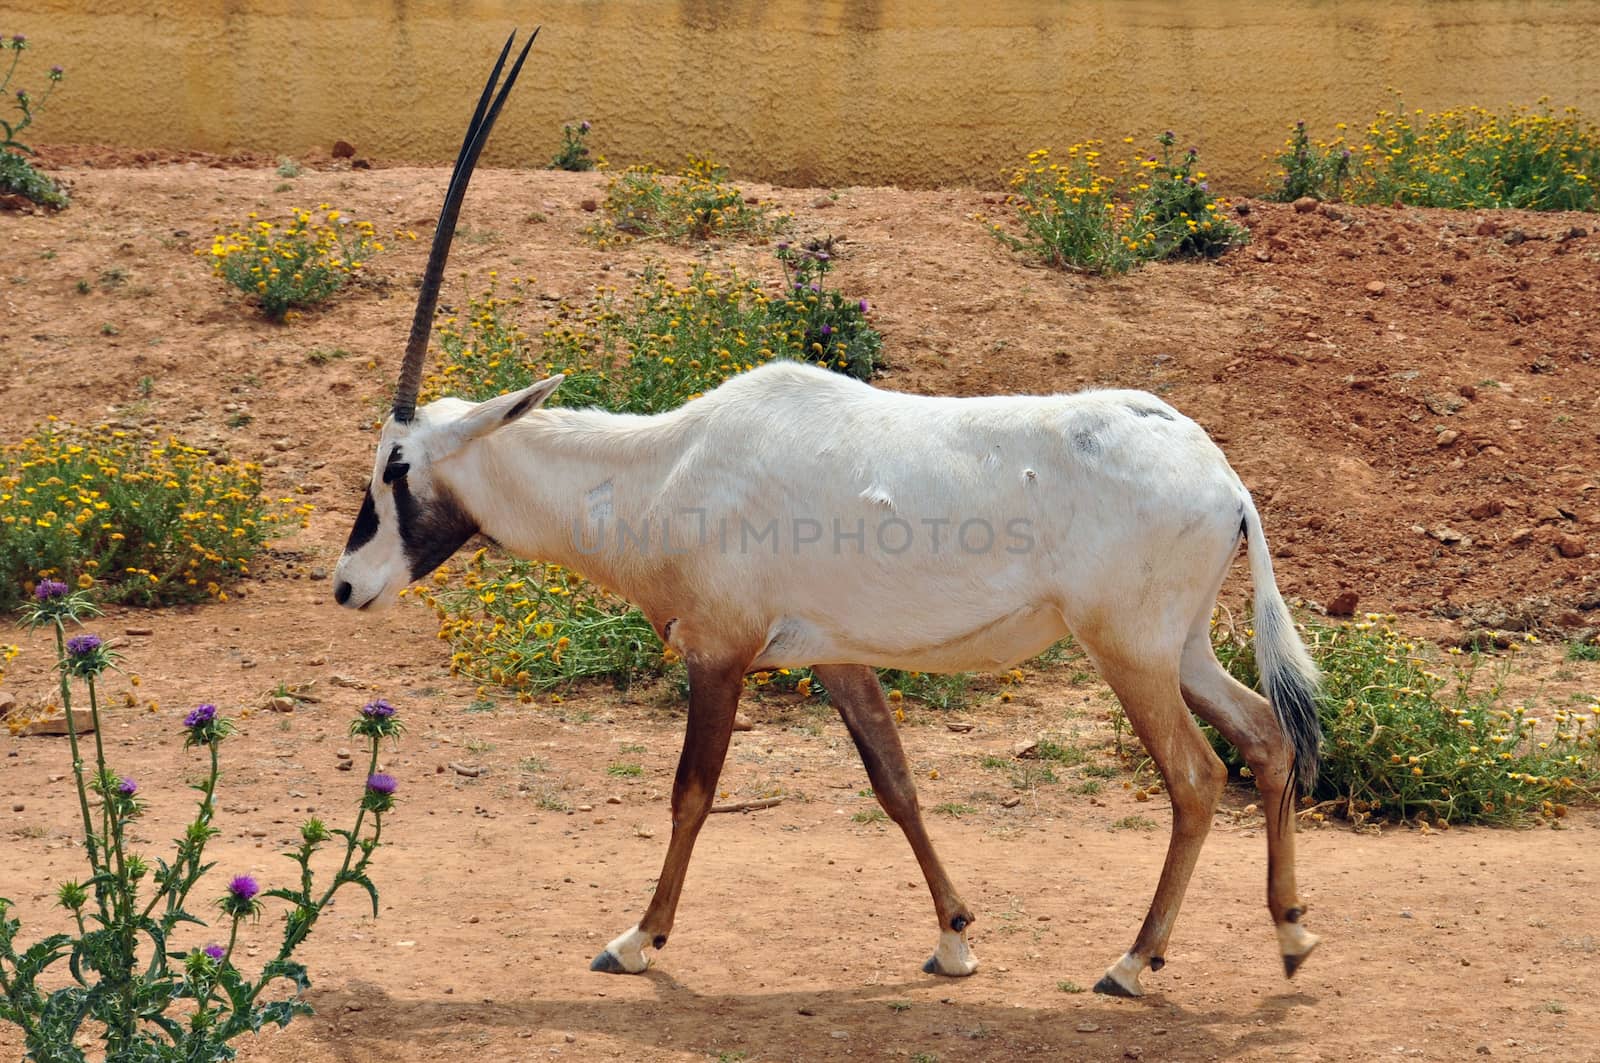 Arabian oryx and blooming flowers. Previously extinct antelope species reintroduced in the wild in the 1980's through captive breeding.